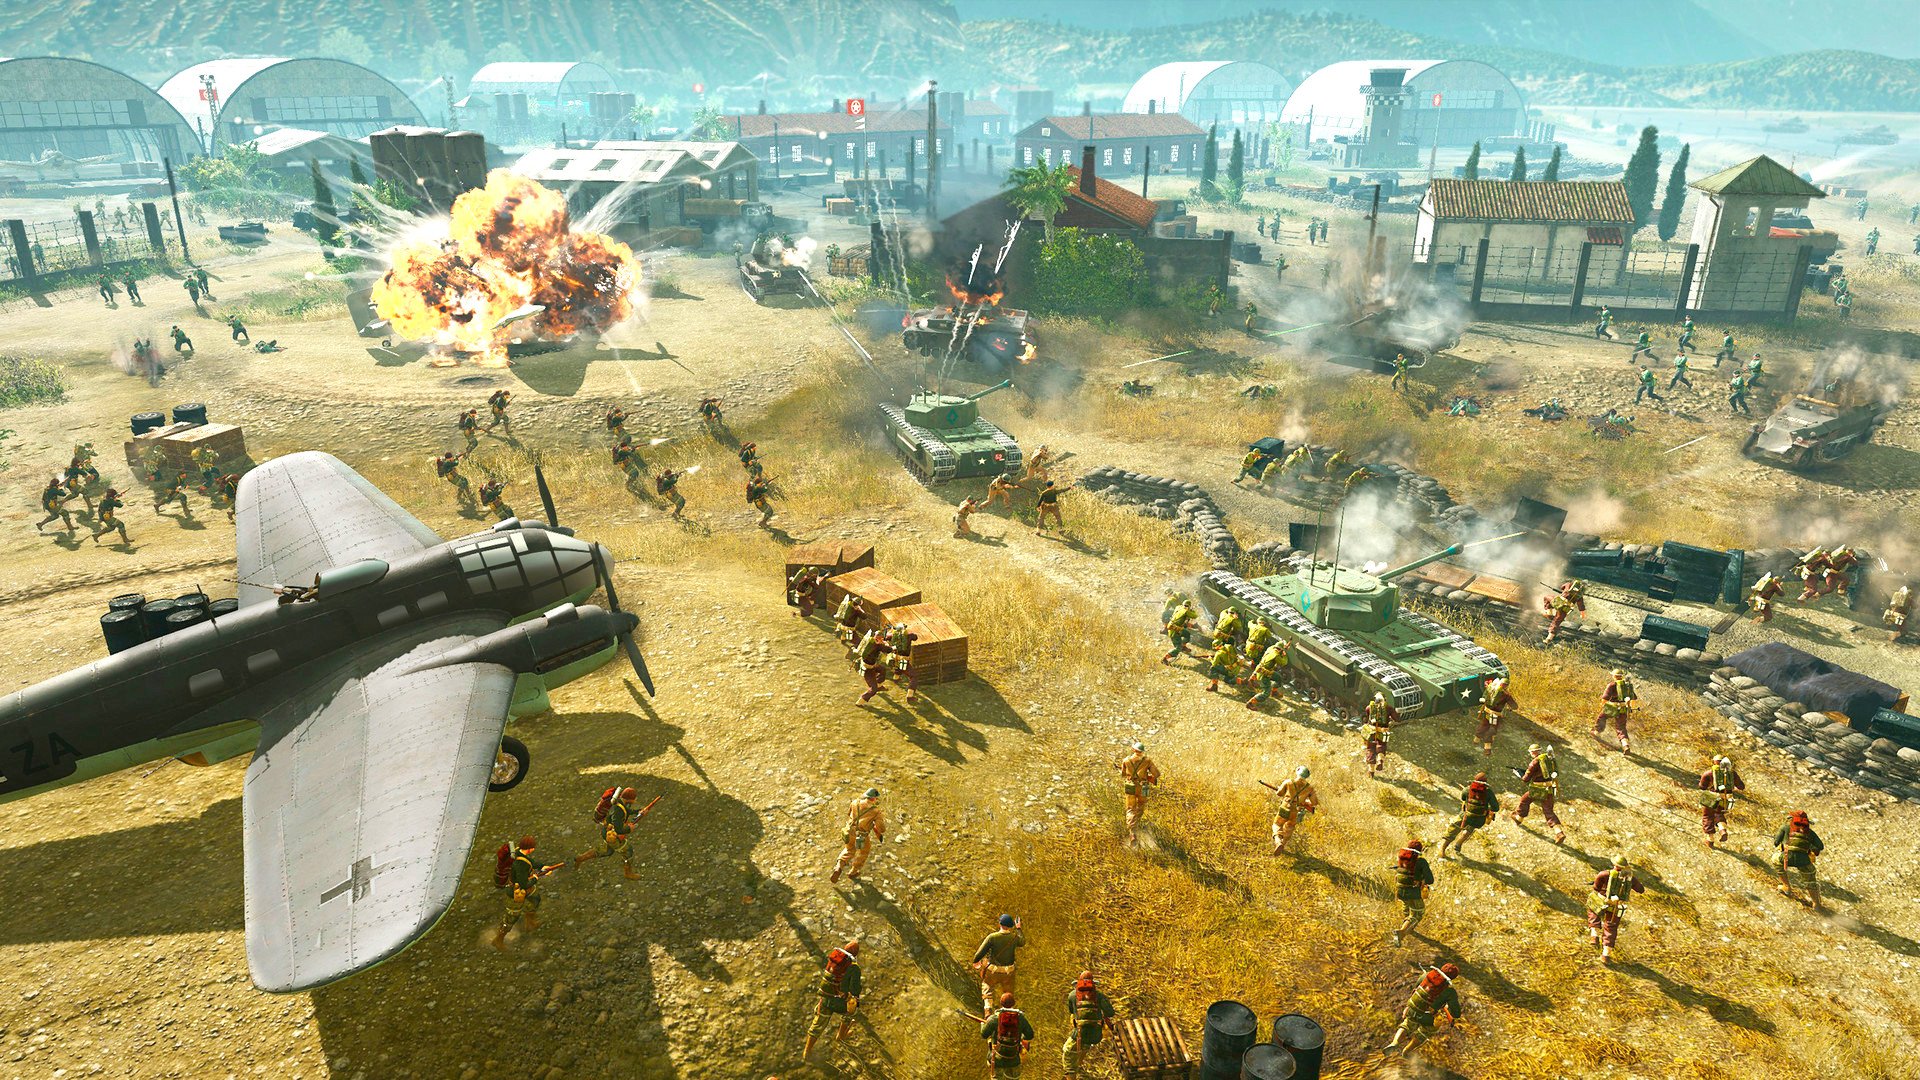 best RTS games guide - Official SEGA screenshot from Company of Heroes 3 showing a big battle across an airfield, with a transport aircraft in the foreground